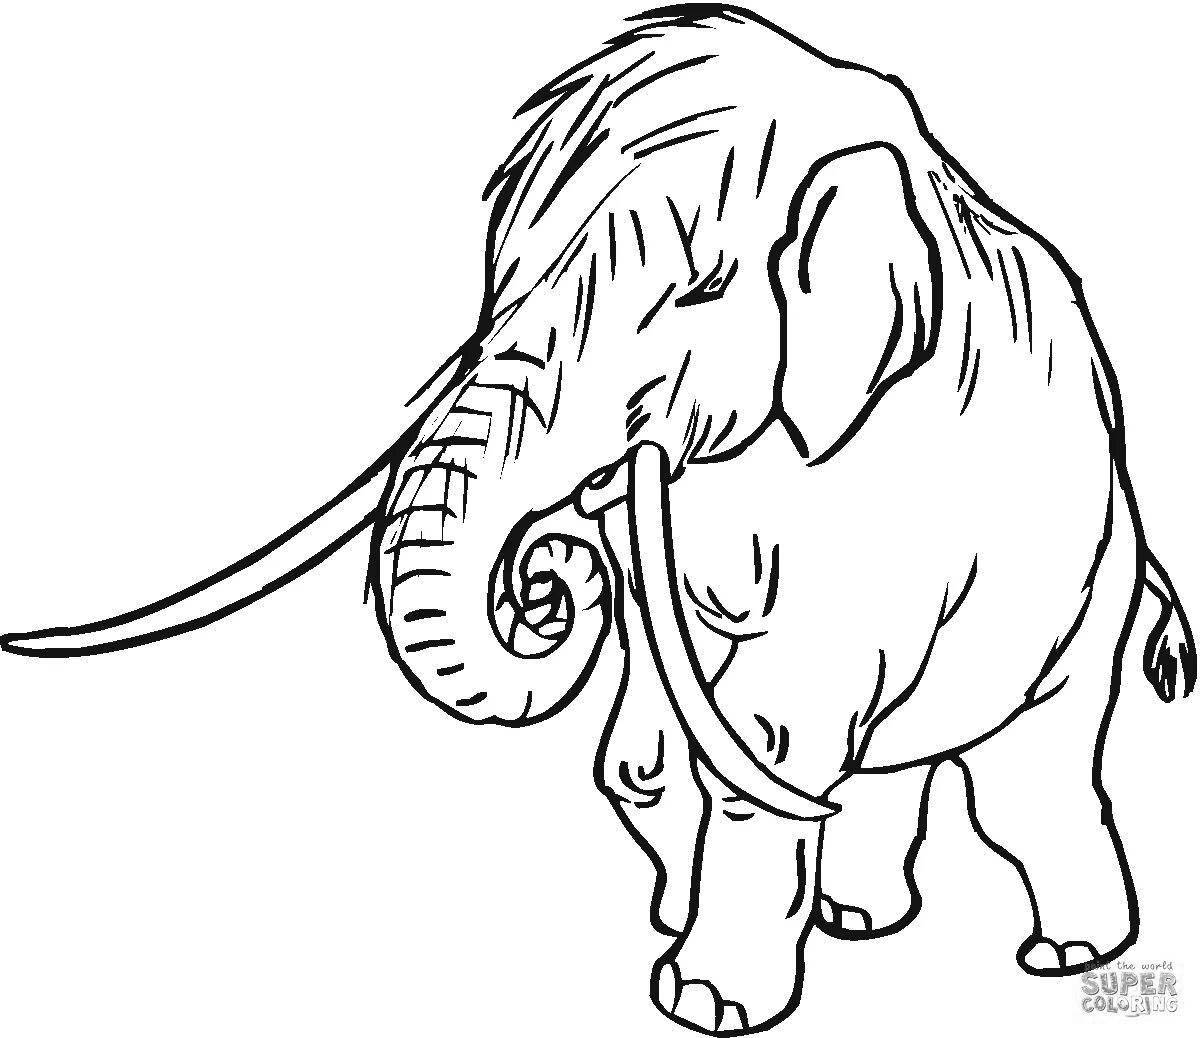 Fantastic mammoth coloring book for kids